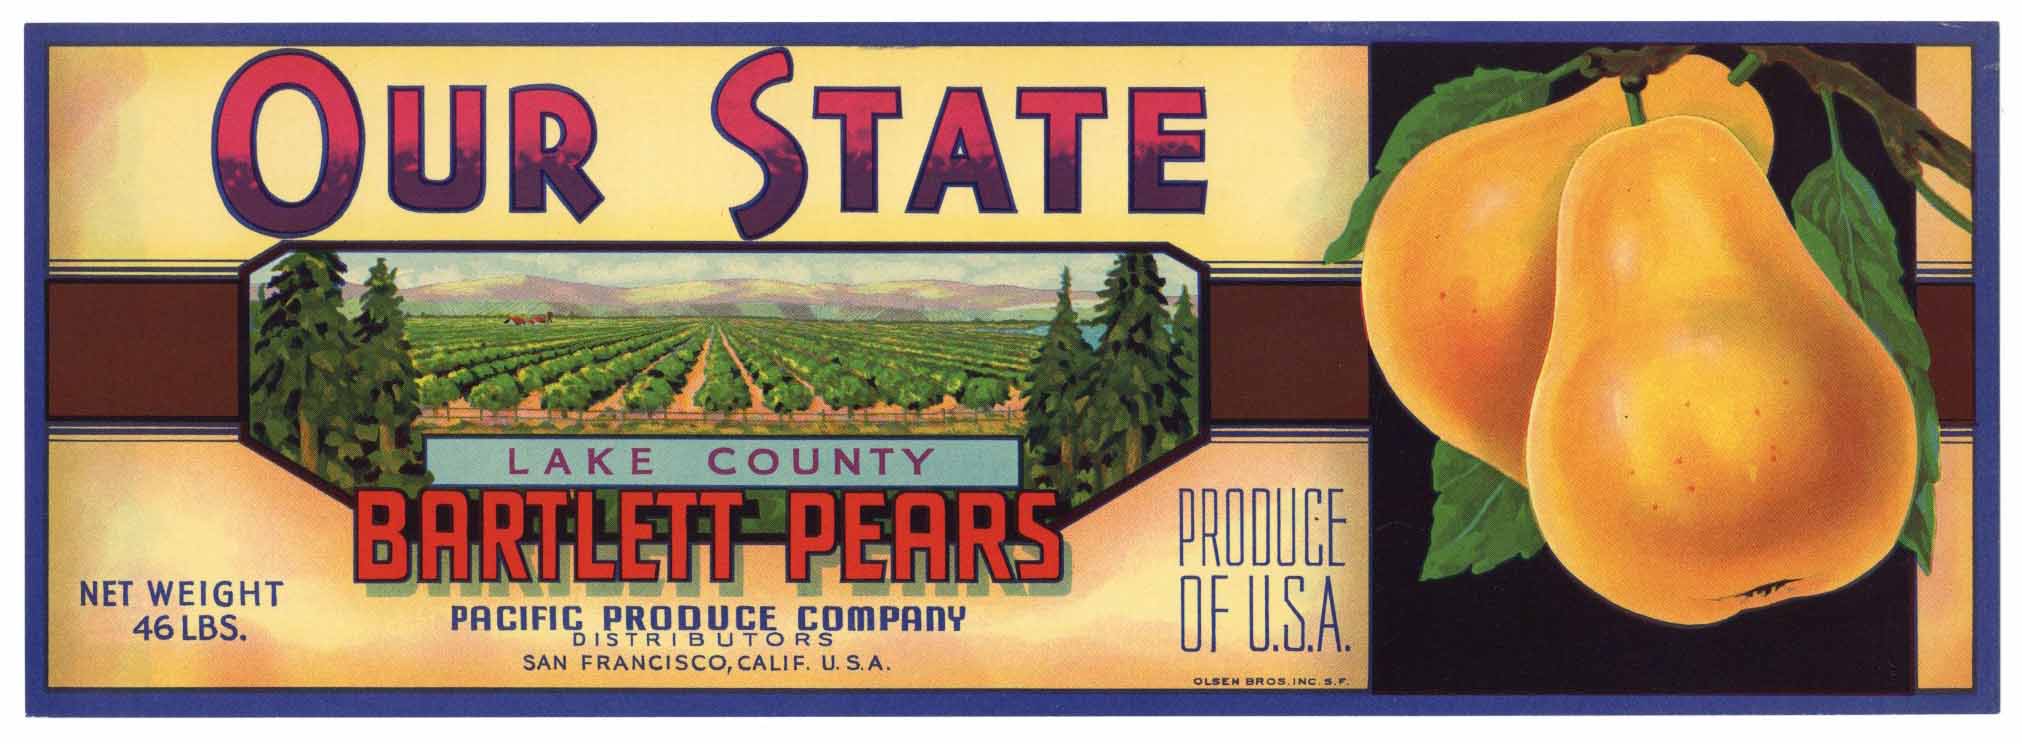 Our State Brand Vintage Pear Crate Label